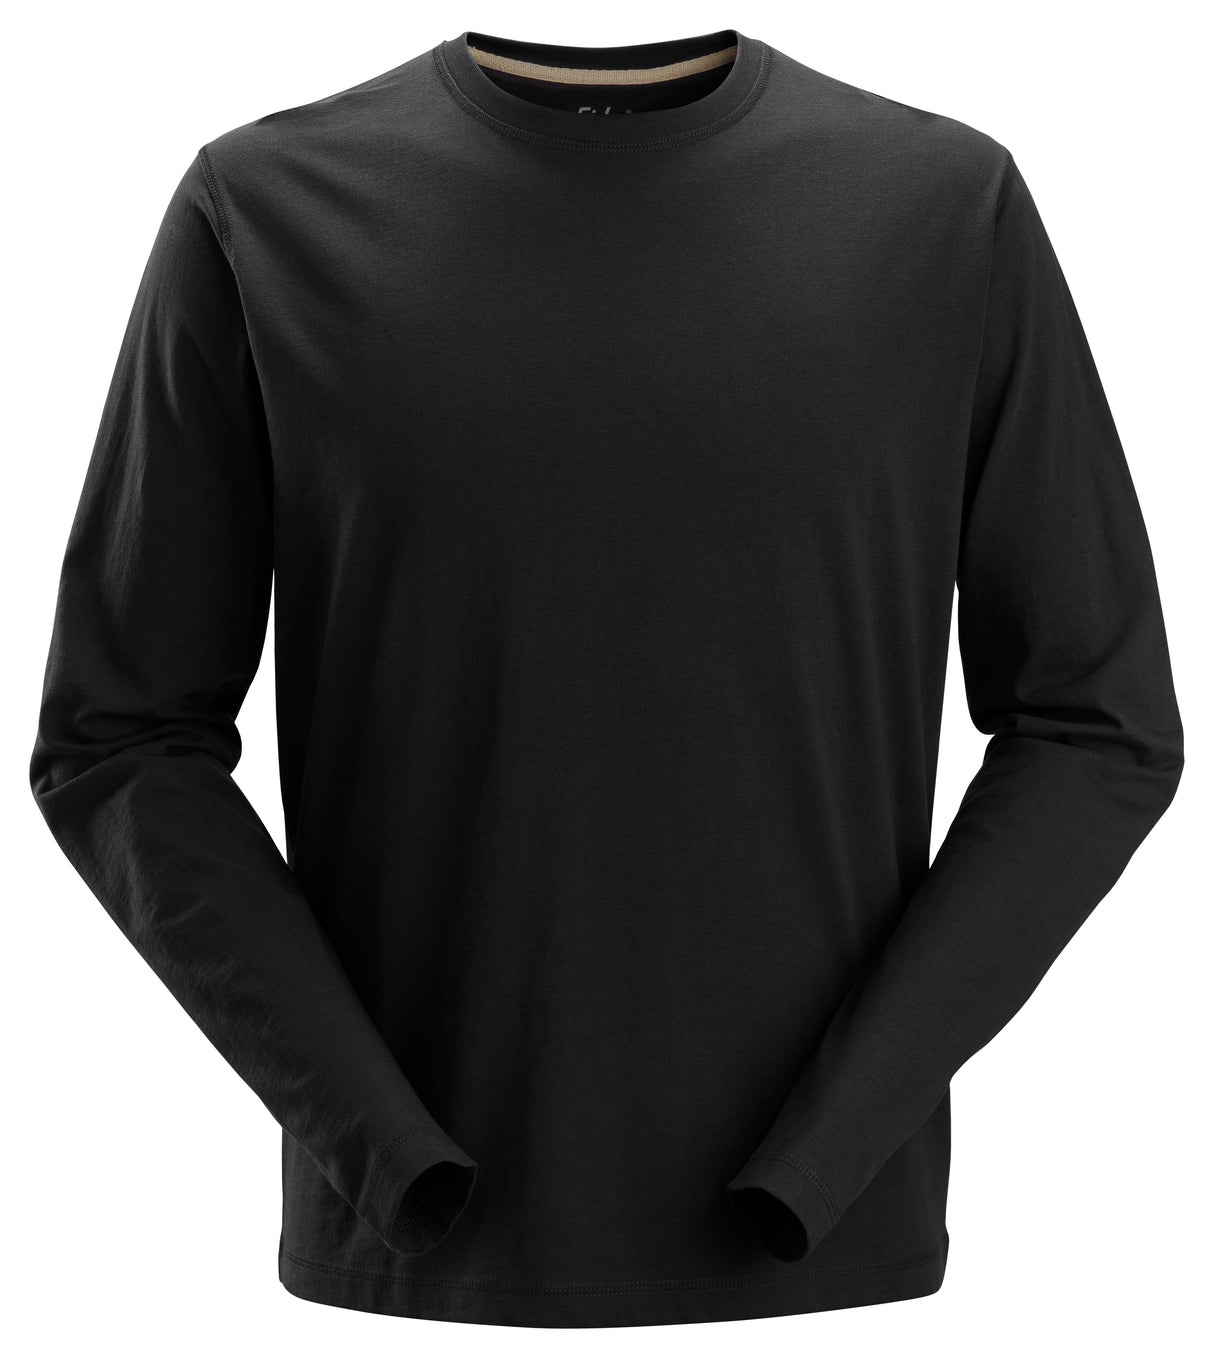 Snickers 2496 Long-Sleeve T-Shirt